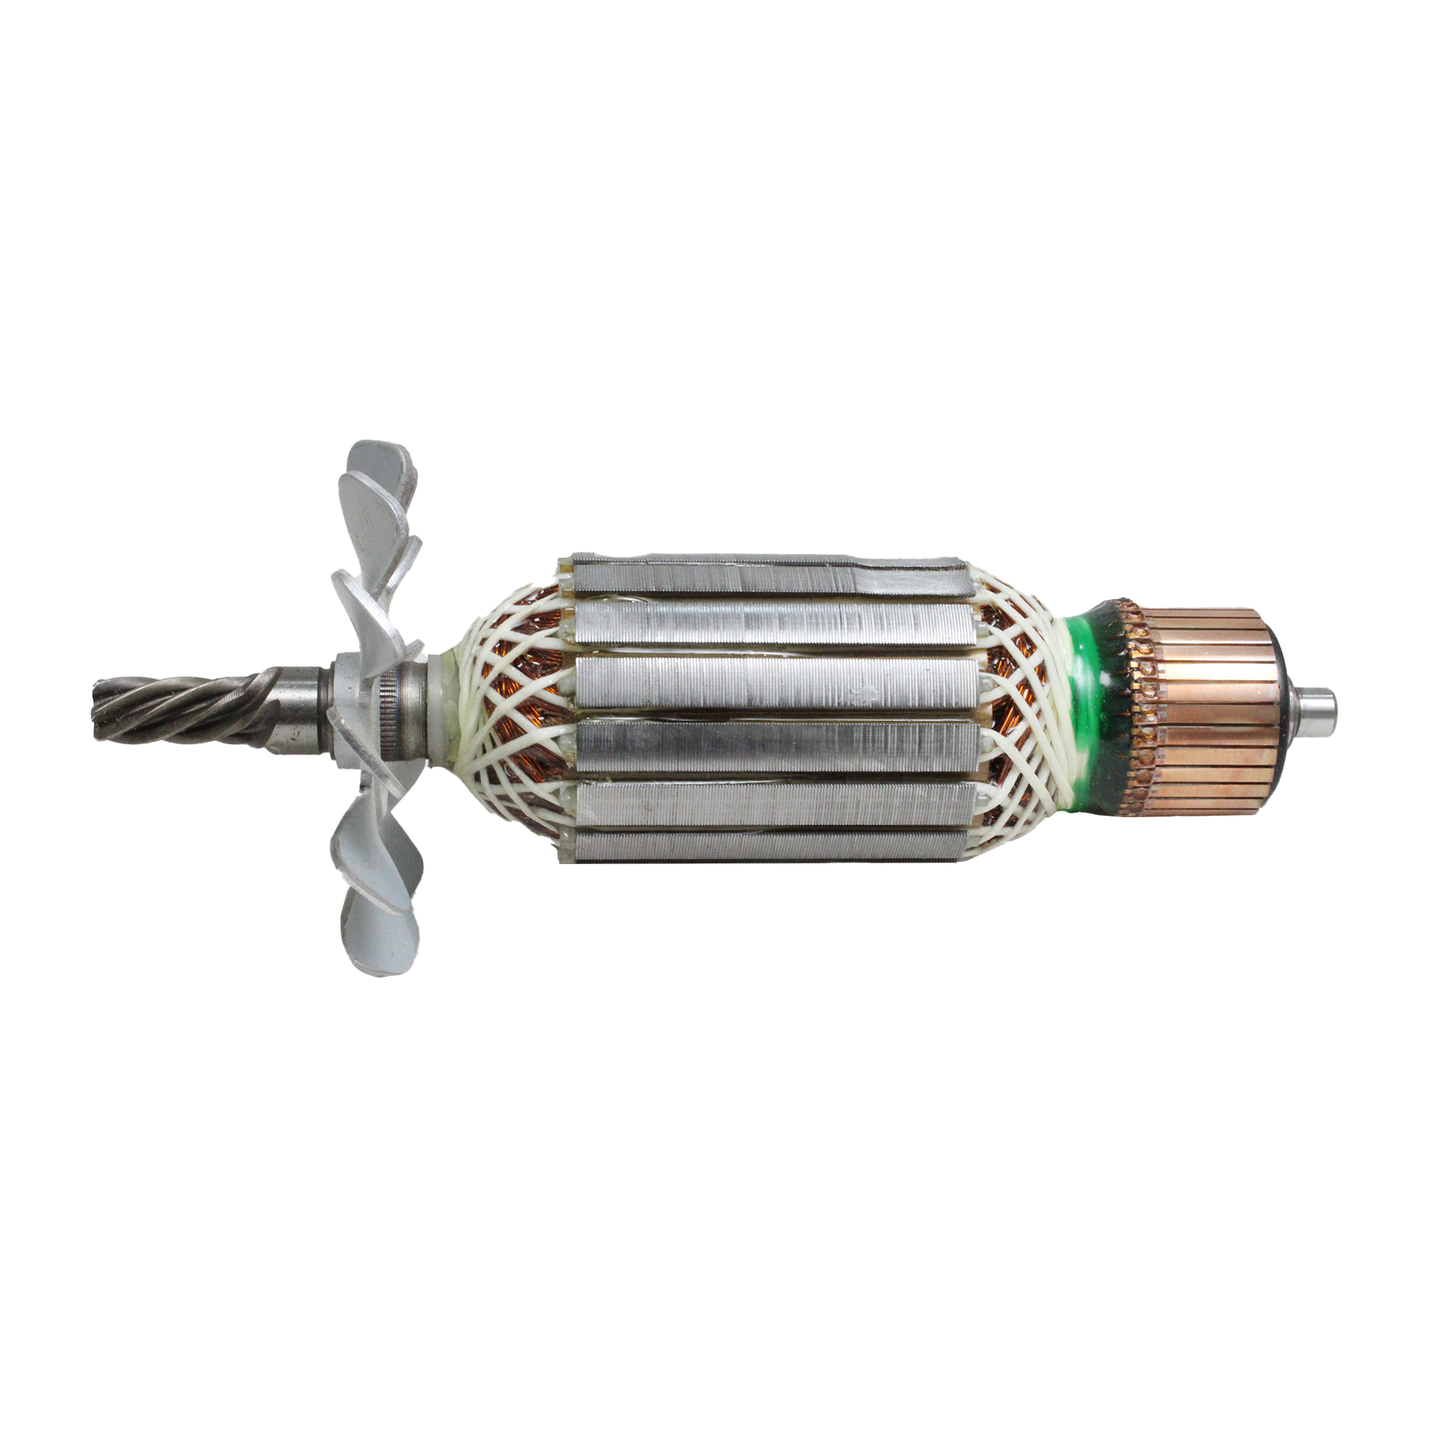 AEGON ACWFCC14STD Copper Armature - Compatible with HiKOKI CC14STD Chopsaw and Similar Models of Other Brands